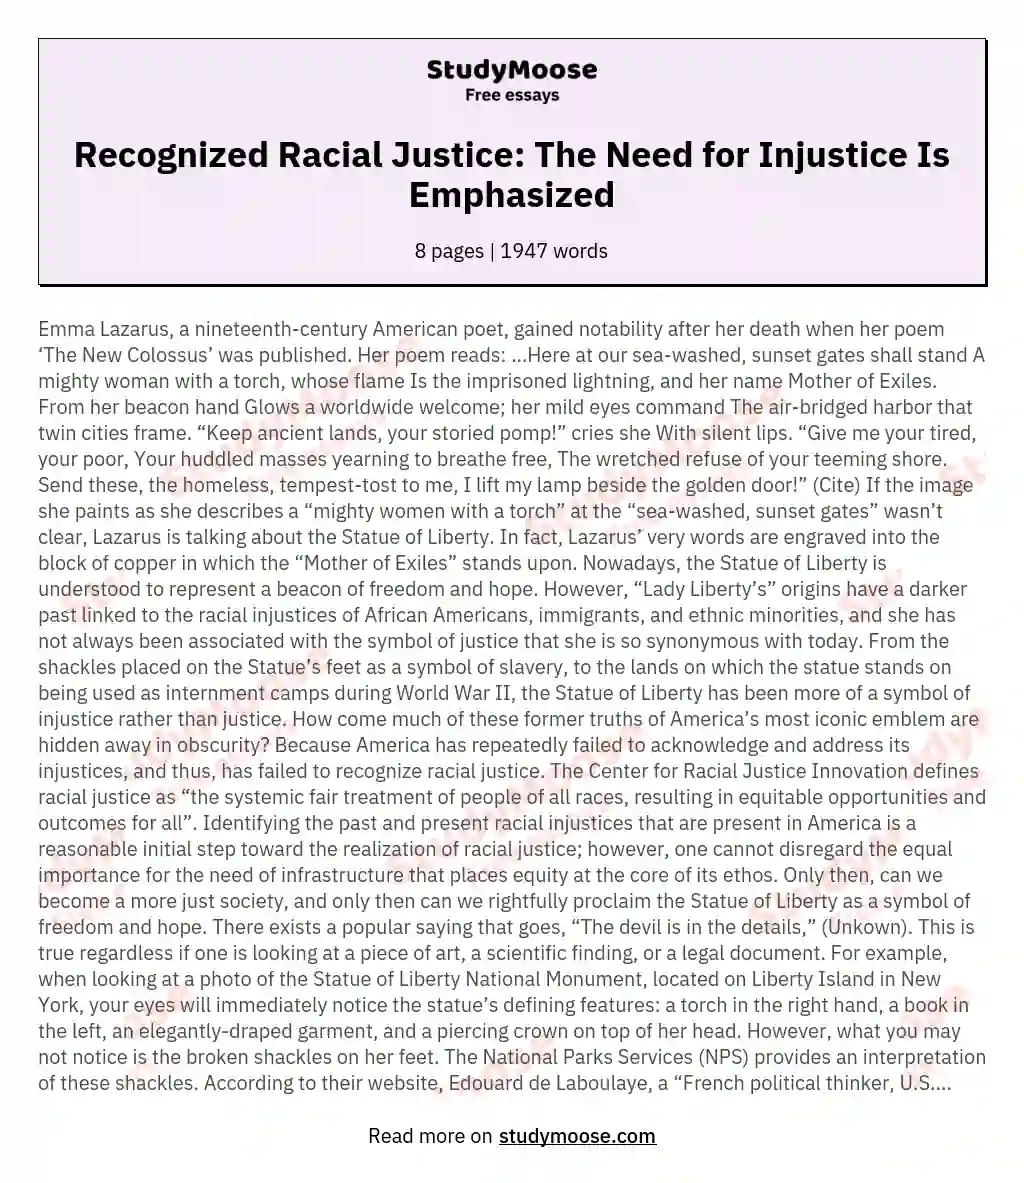 Recognized Racial Justice: The Need for Injustice Is Emphasized essay